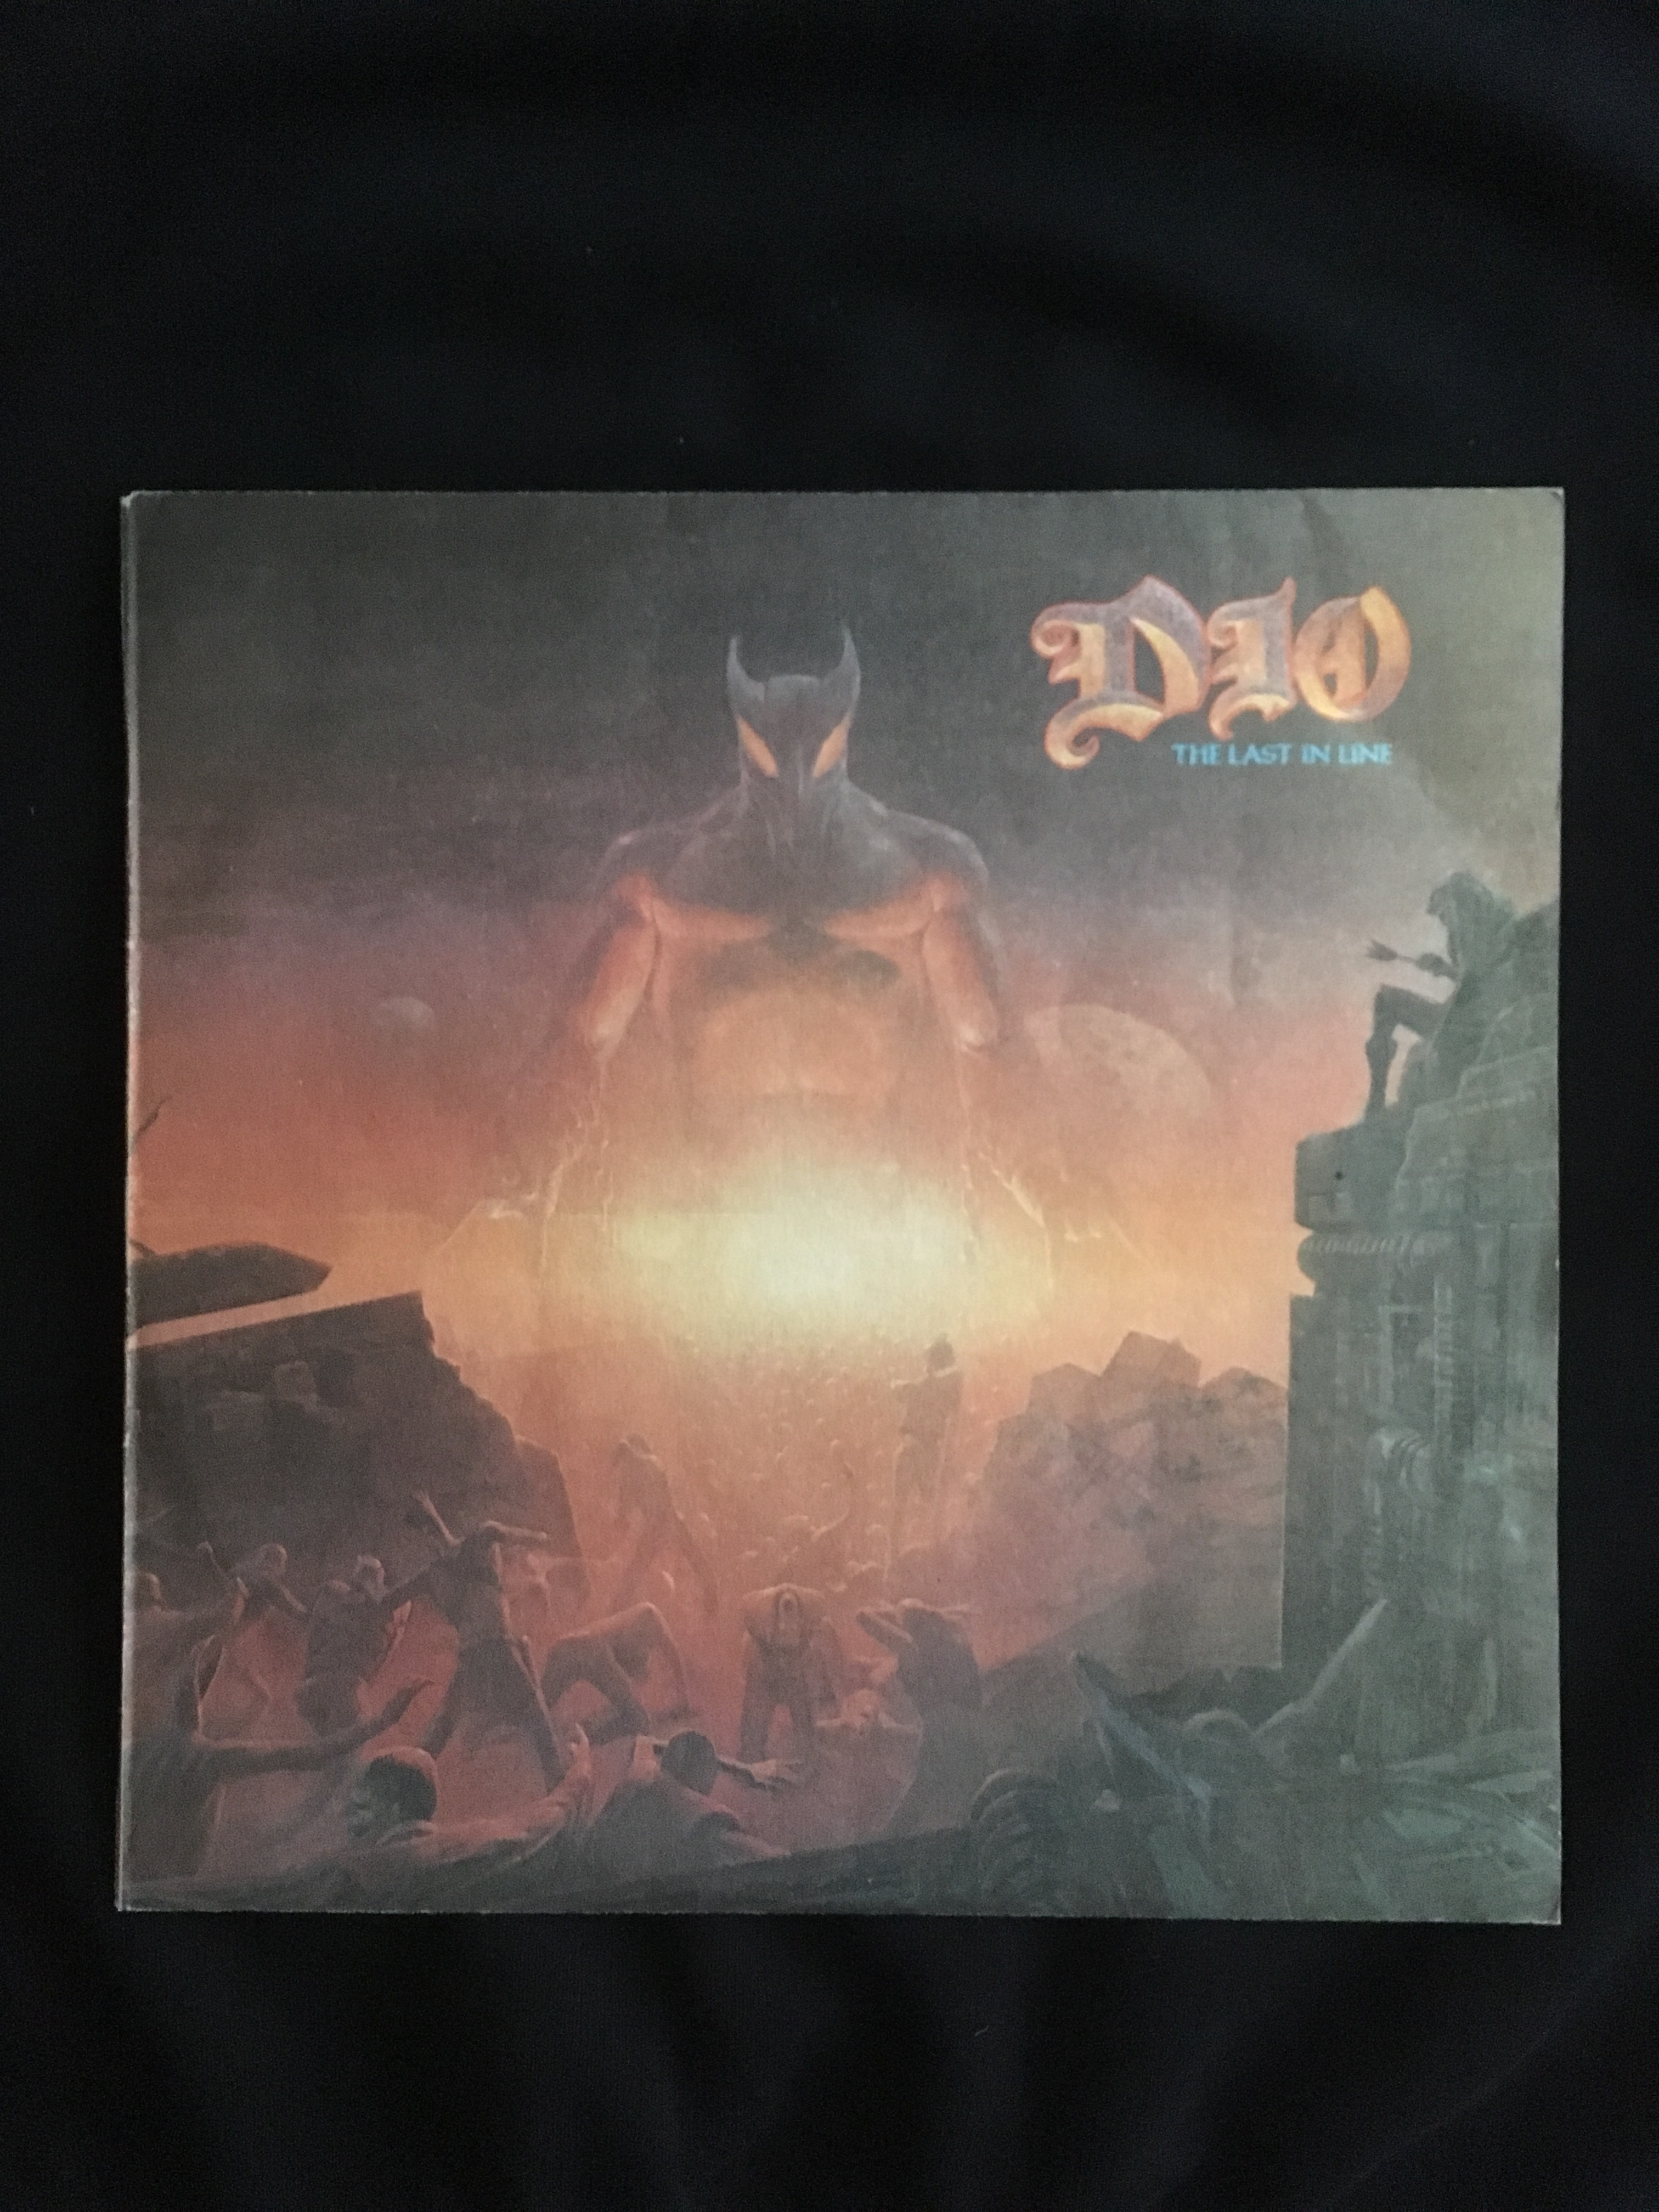 Dio -The last in line